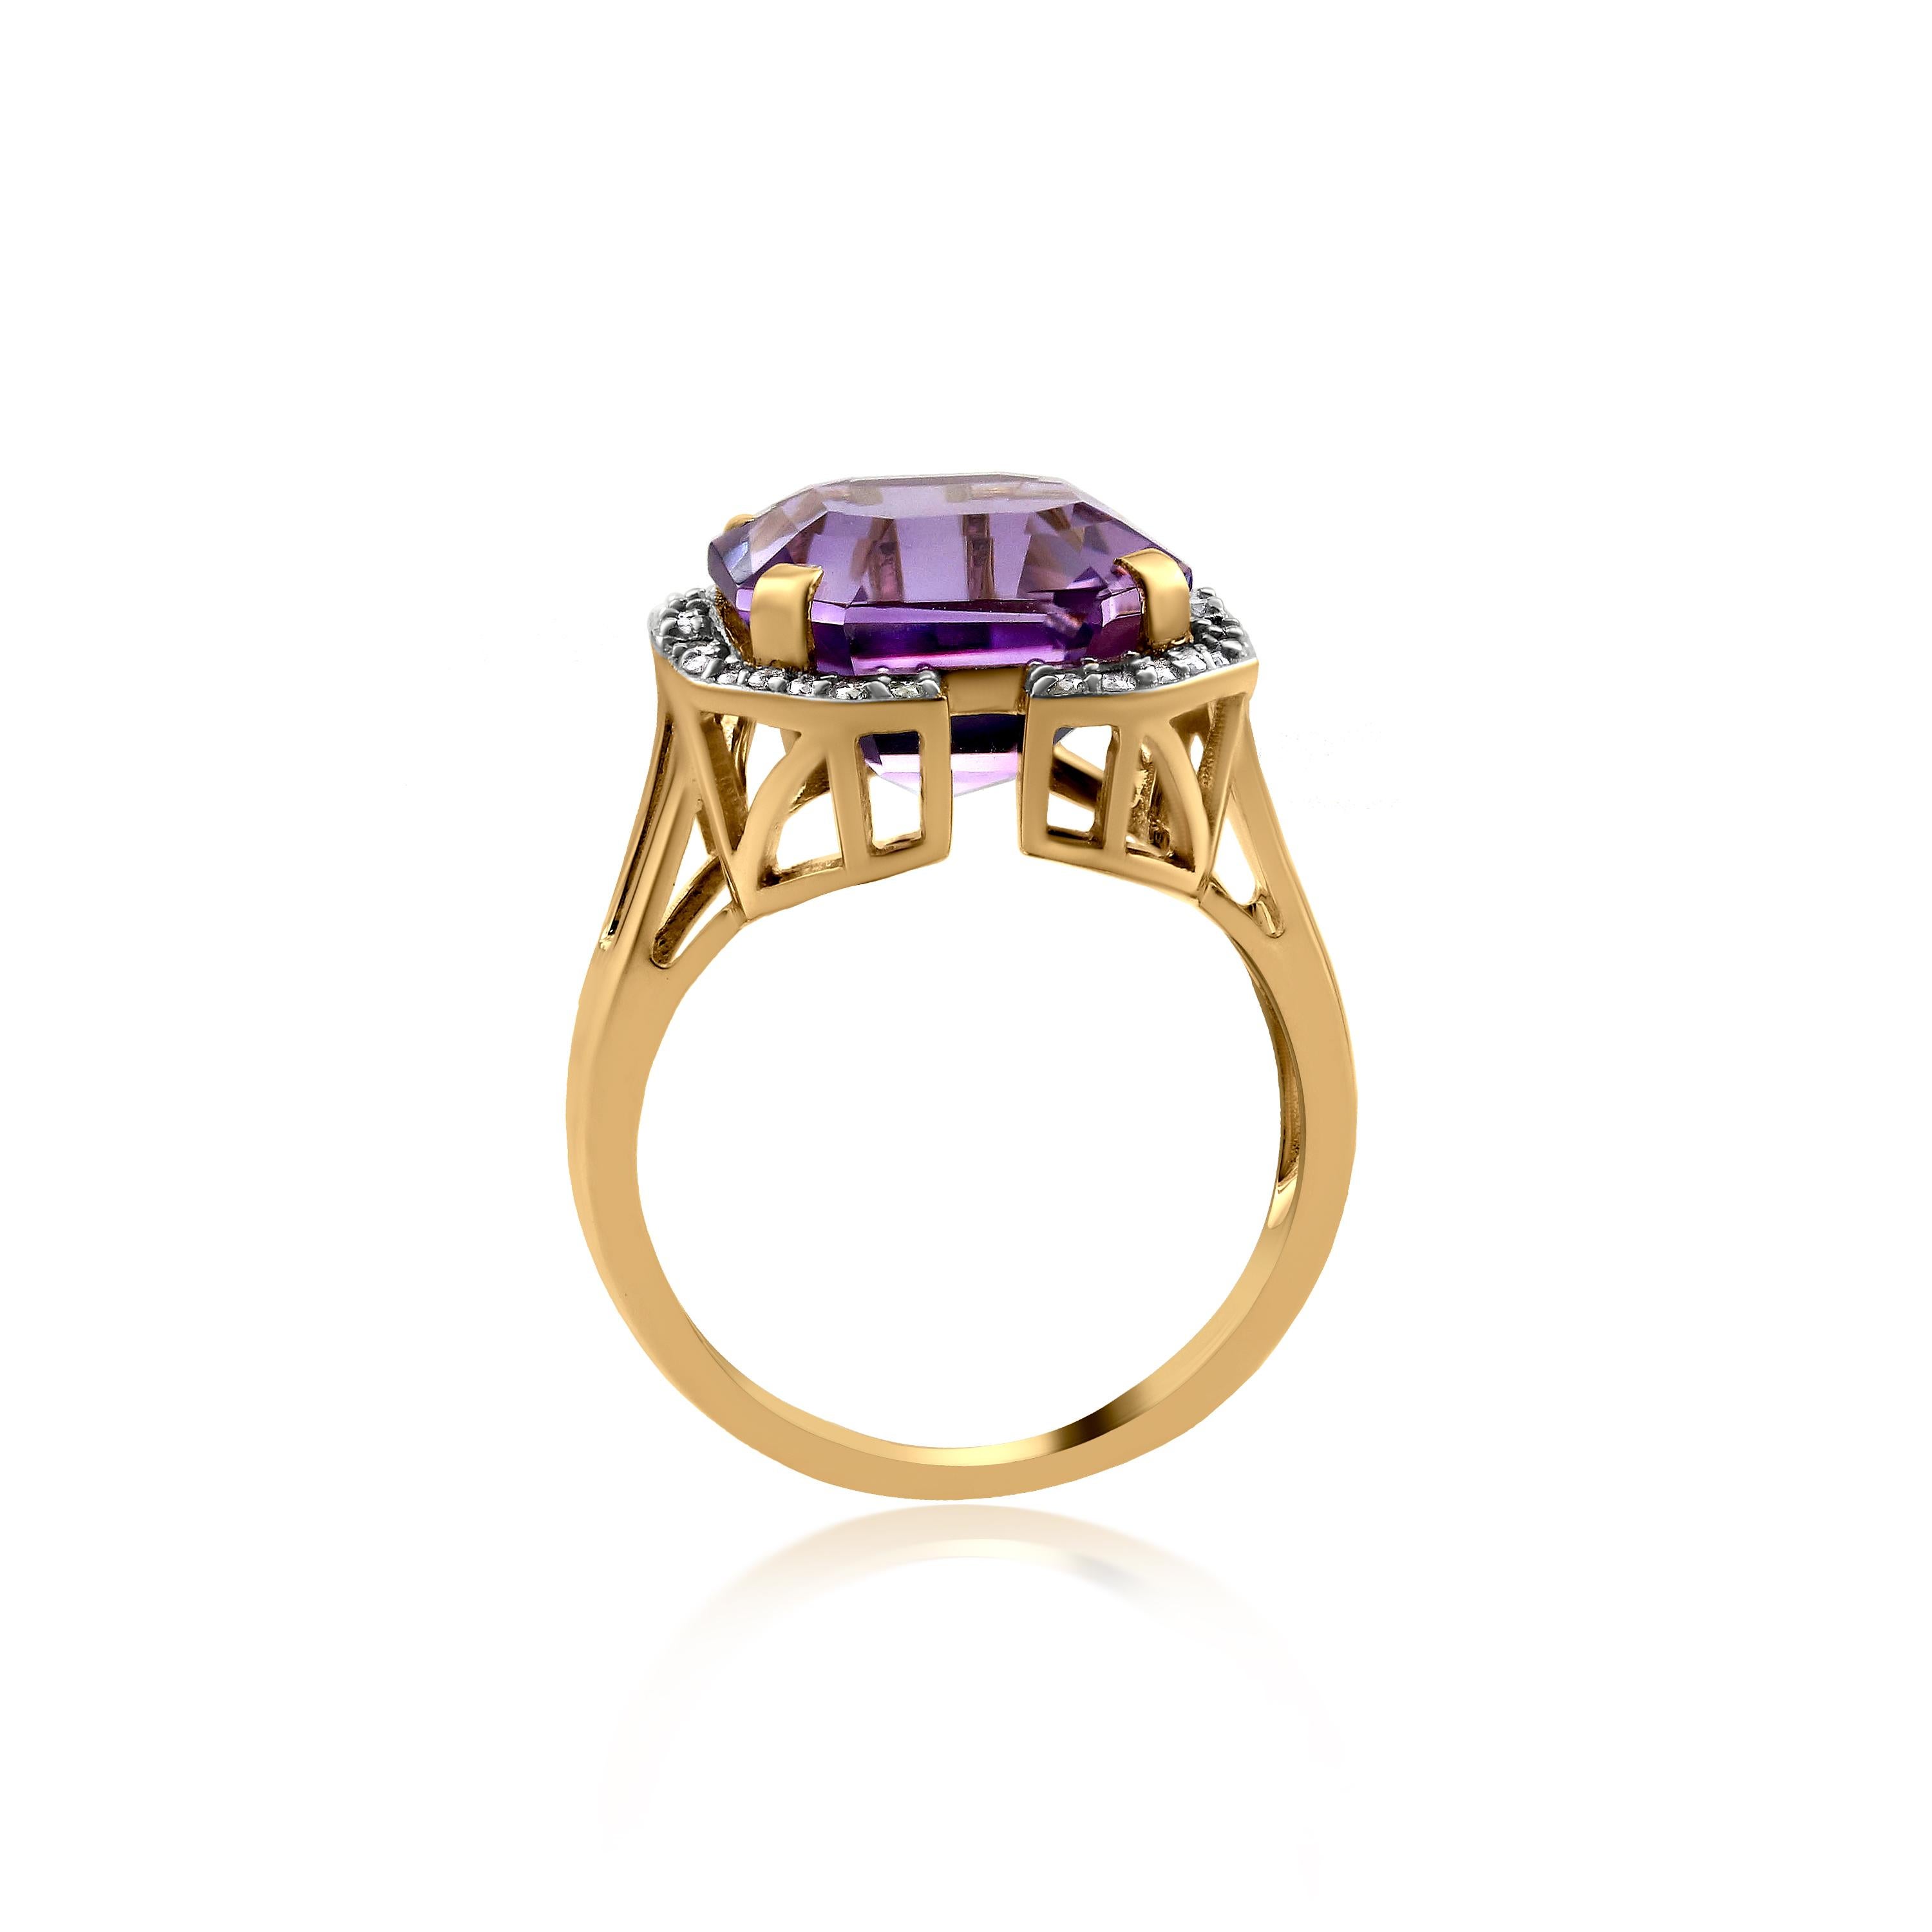 Gemistry 7.6 Carat Asscher Cut Amethyst Solitaire Ring with Diamond in 14K Gold 4